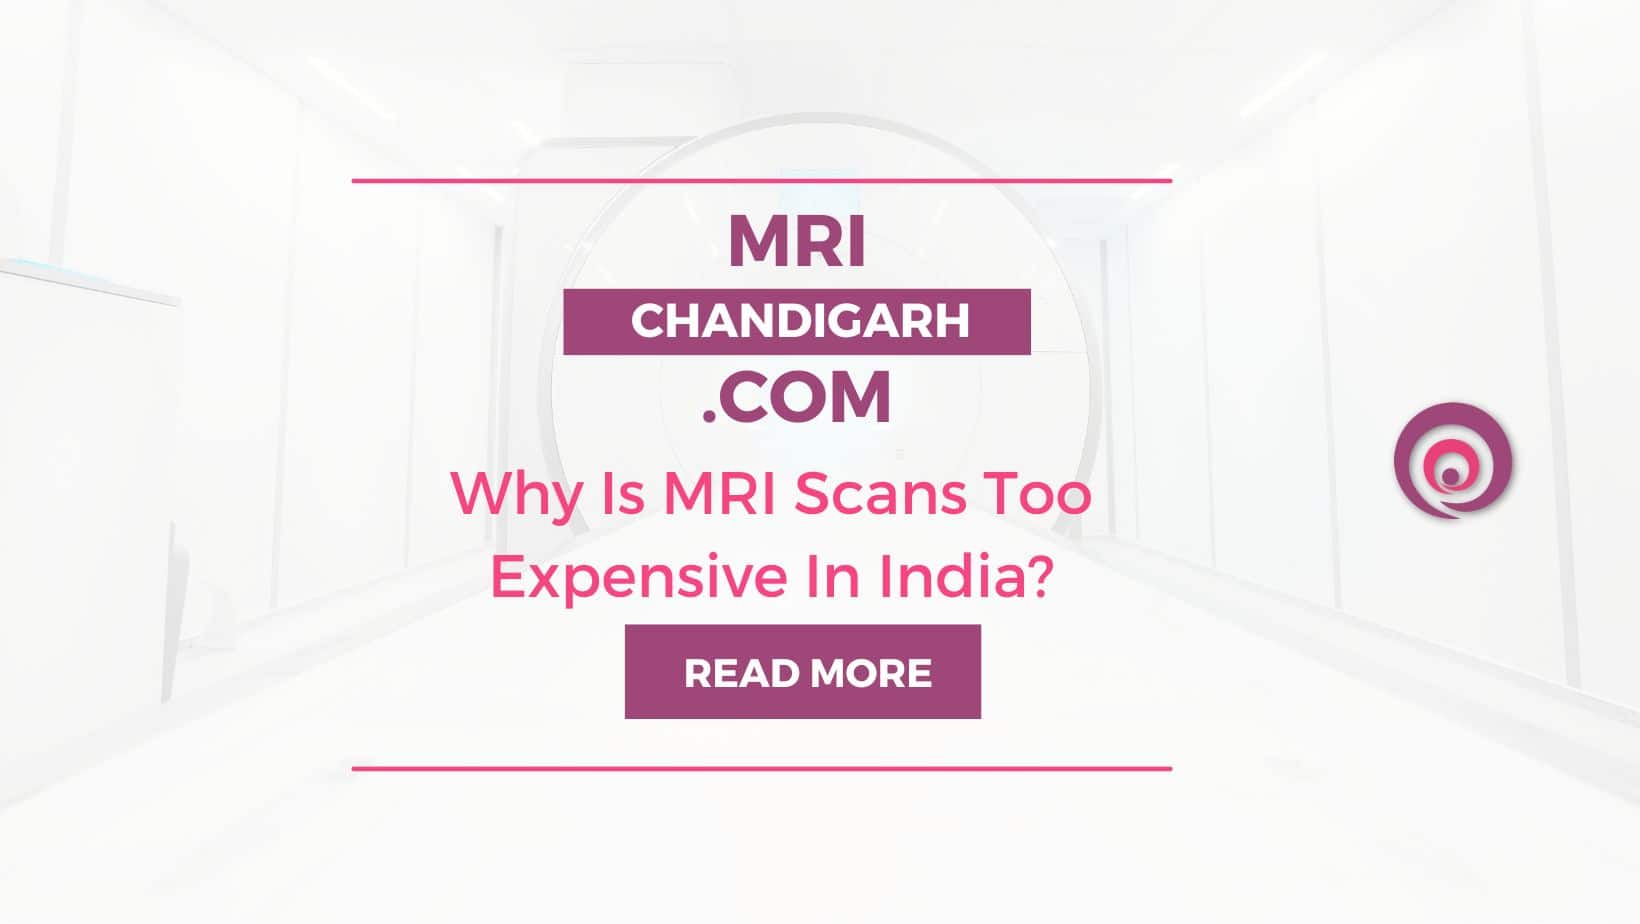 Why Is MRI Scans Too Expensive In India?